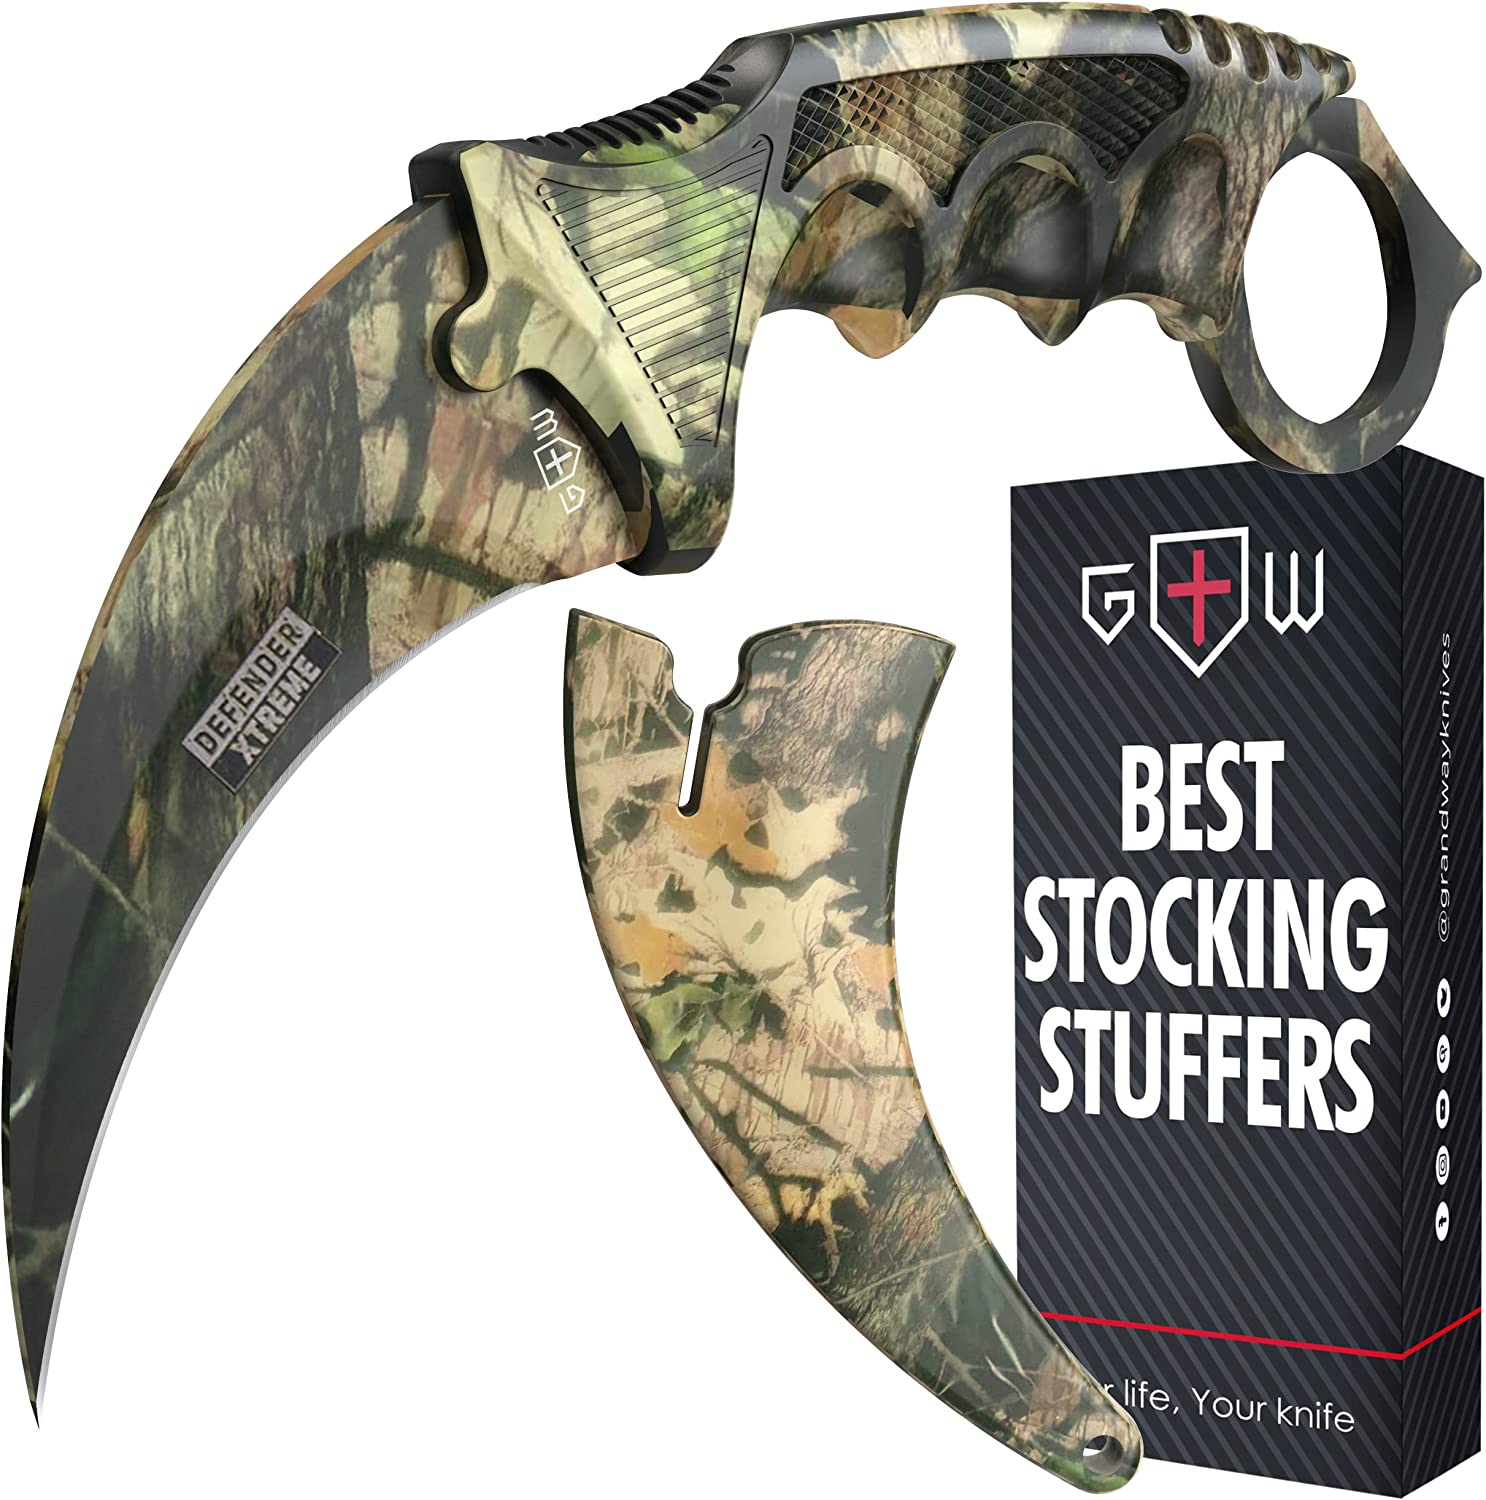 Karambit Knife – Karambit Fixed Blade Knife – Karambit Knives – CSGO Raptor Claw Knifes with Plastic Handle – Best Combat Carambit for Hunting Camping Hiking EDC for Men Women Comes with Sheath 16853